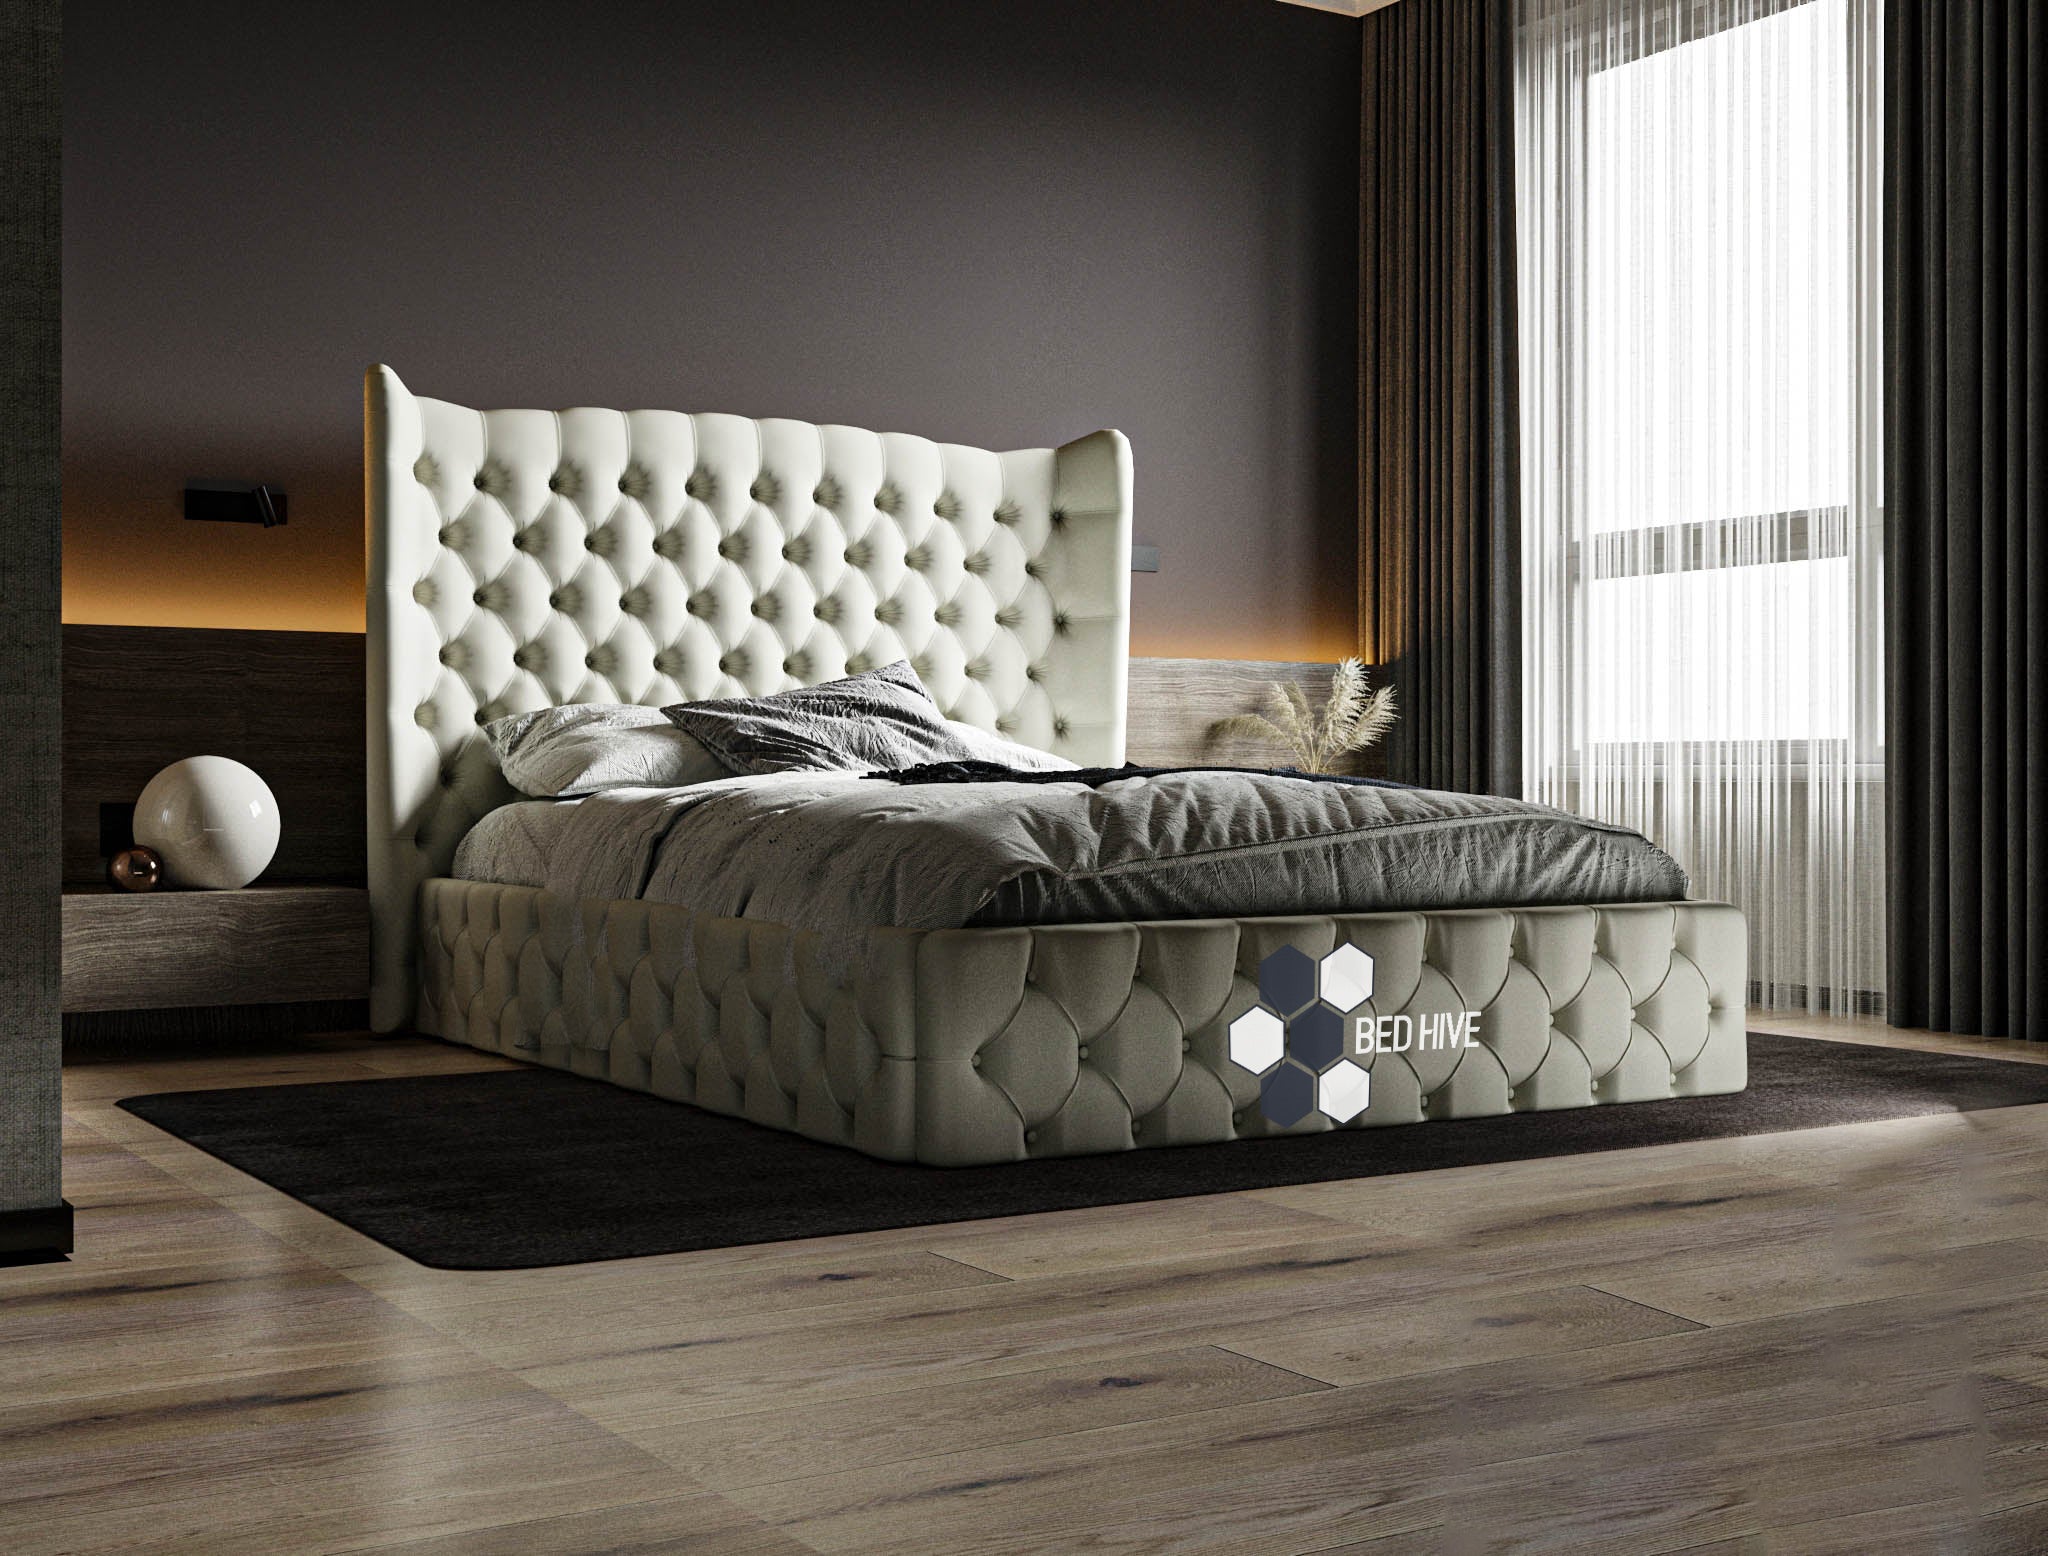 Willow Full Chesterfield Designer Bed, Winged bed, bed frame , chesterfield bed, cream color bed, cream bed, wing back bed, fabric bed, upholstered bed